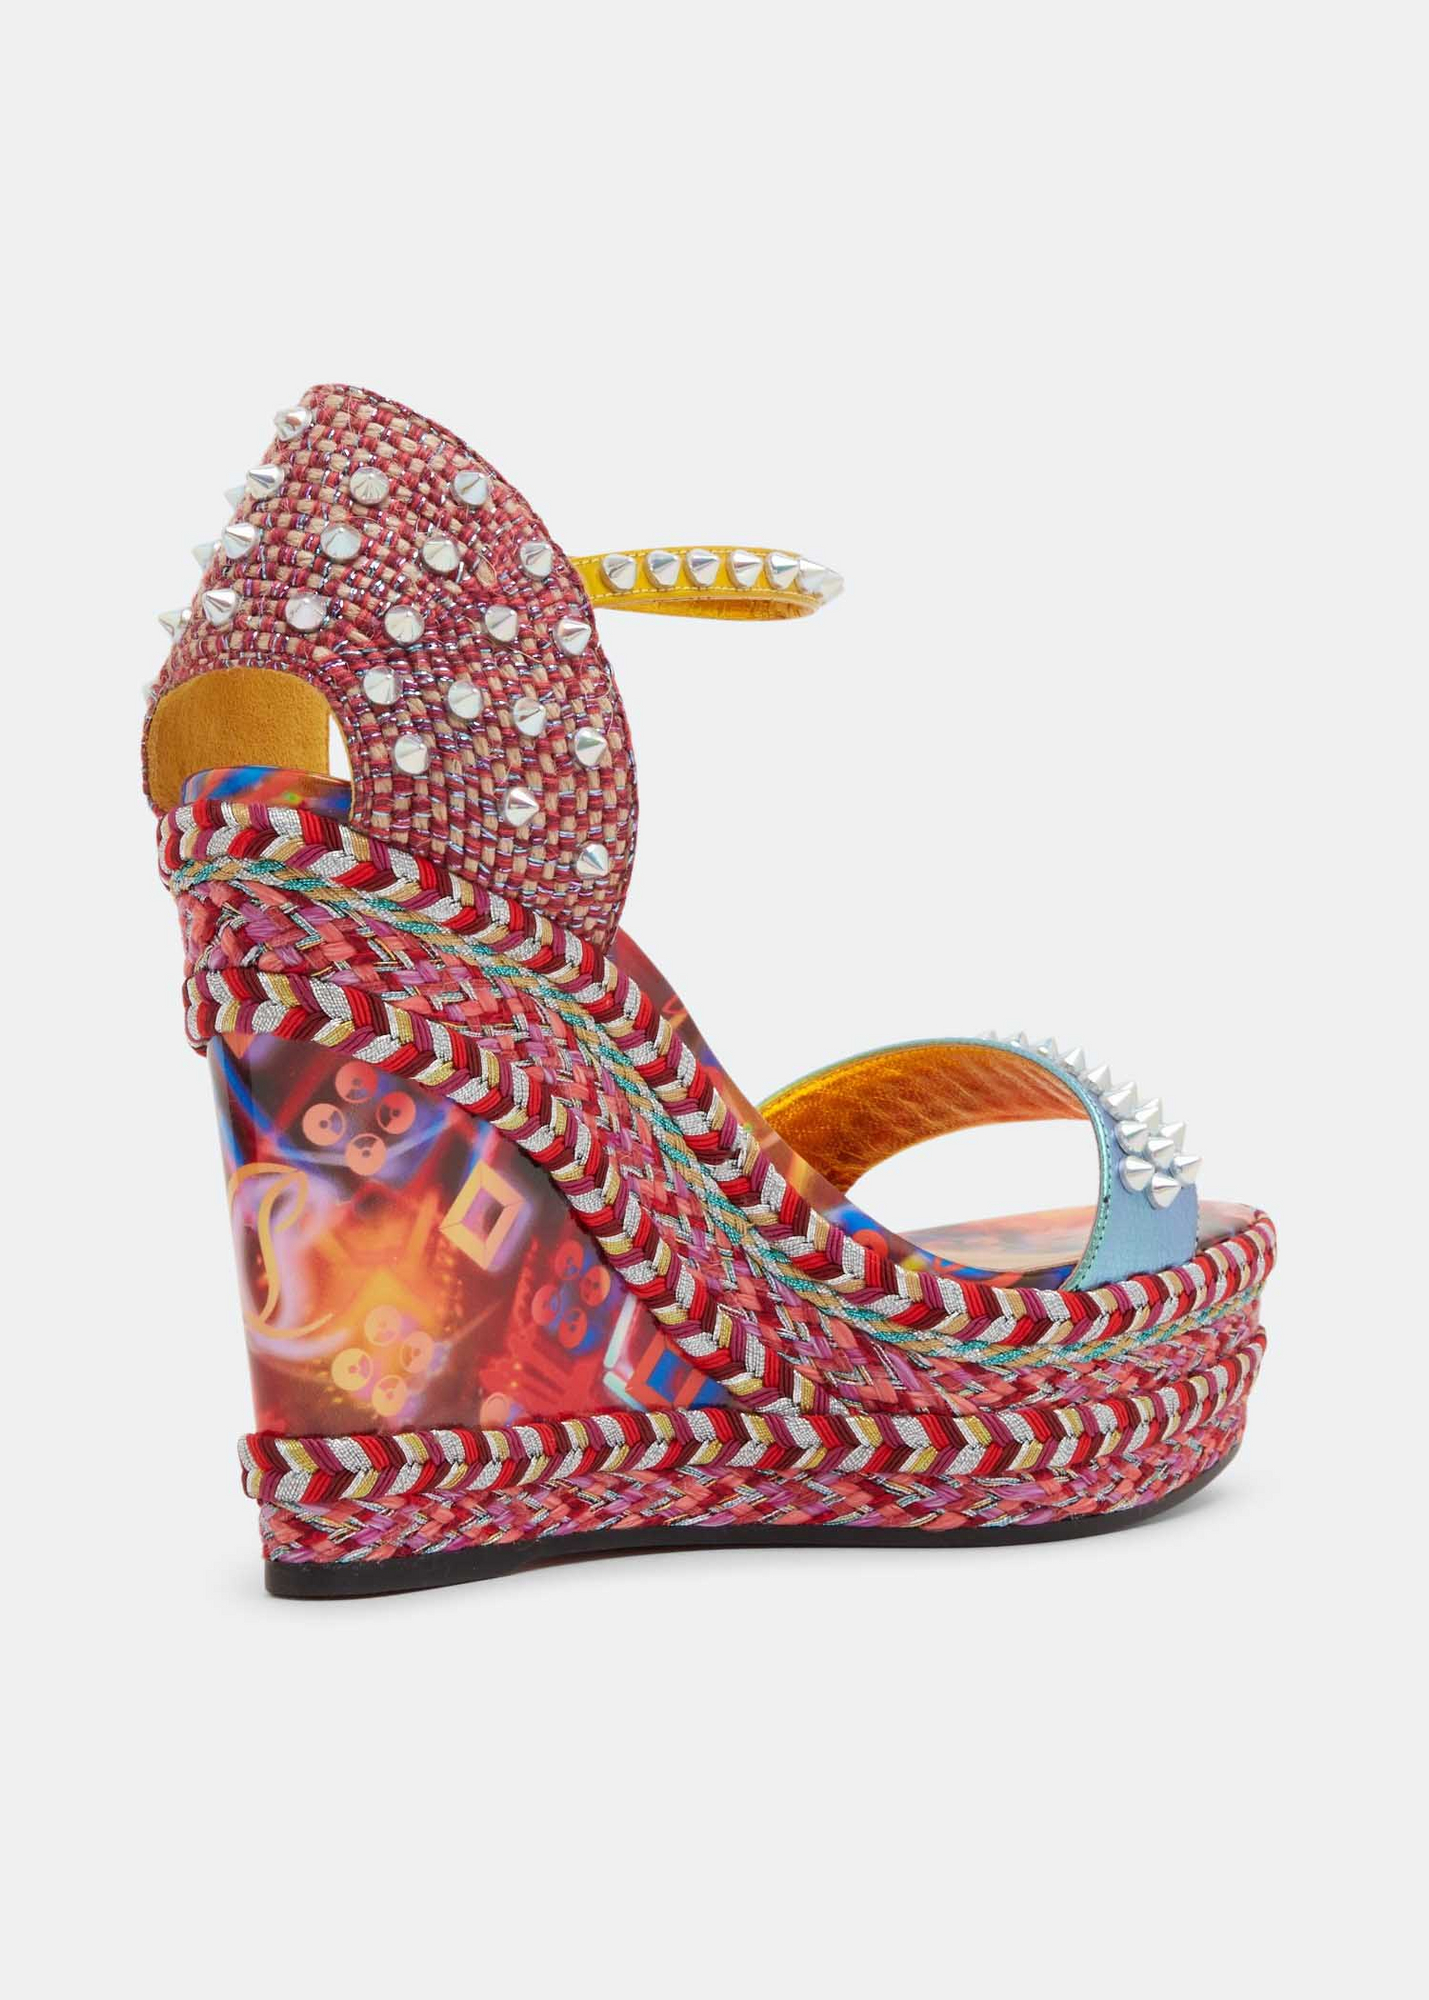 Christian Louboutin Madmonica sandals for Women - Multicolored in 